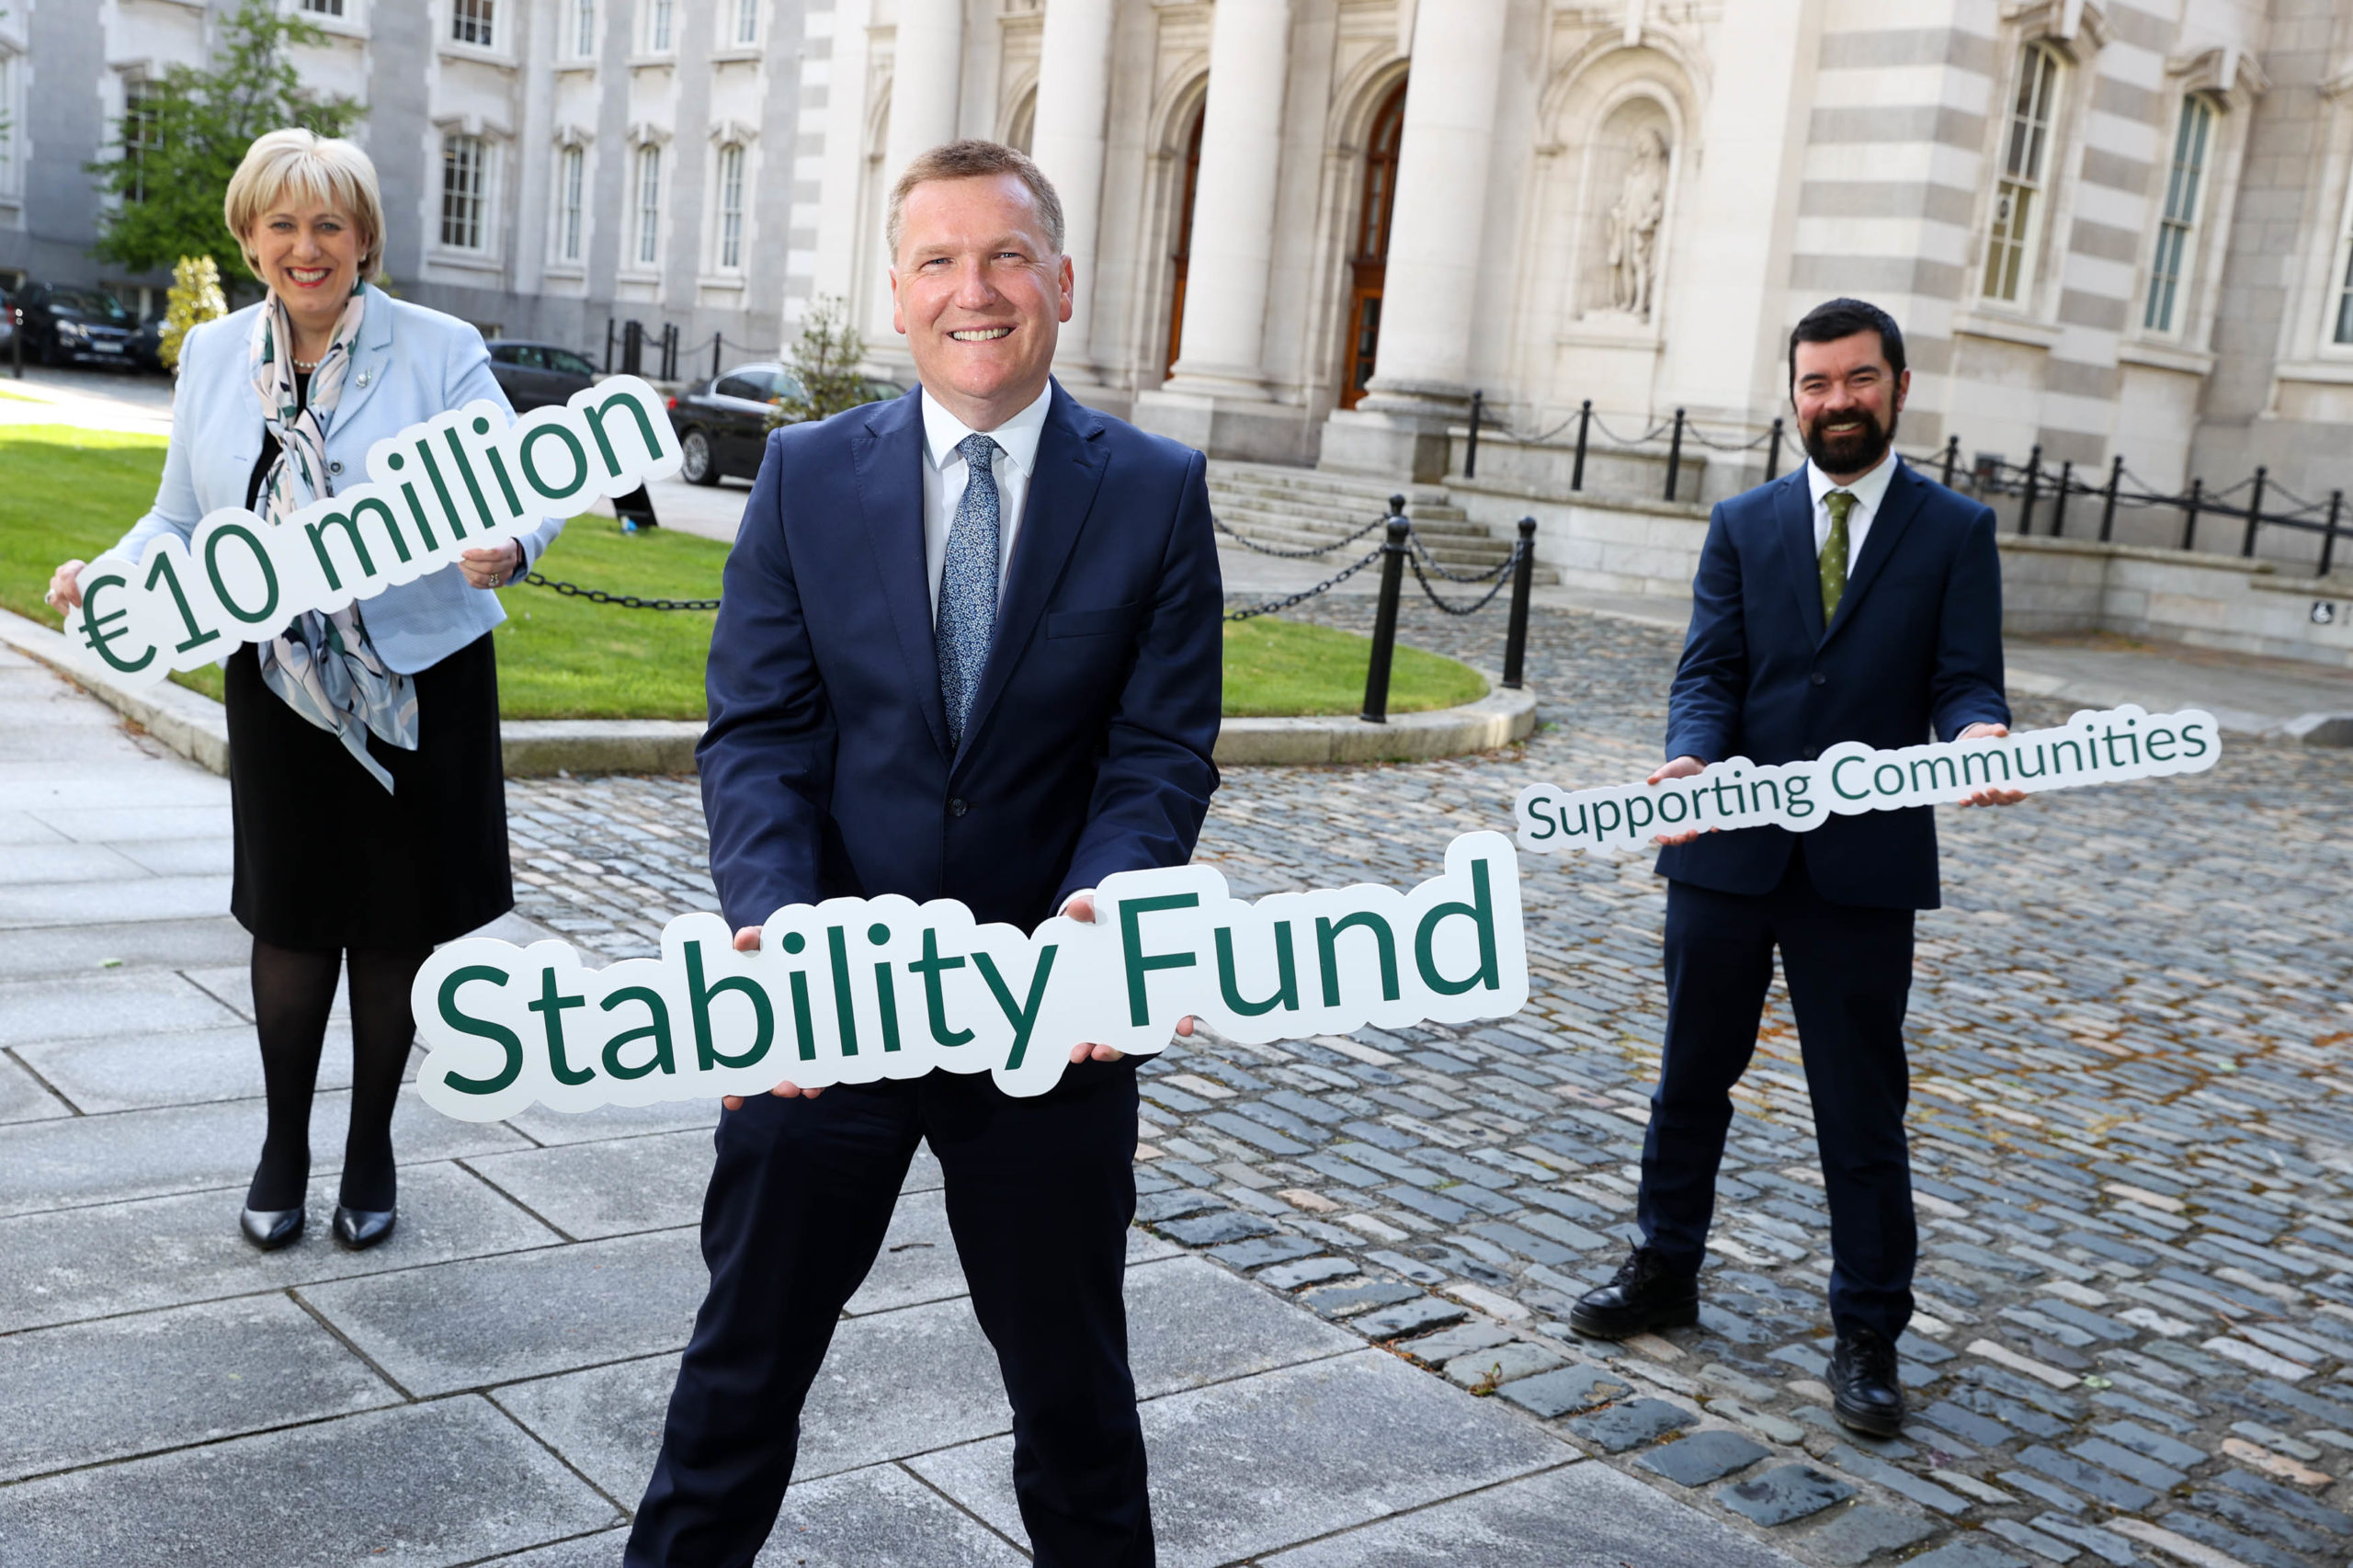 €10m Community Fund Launched